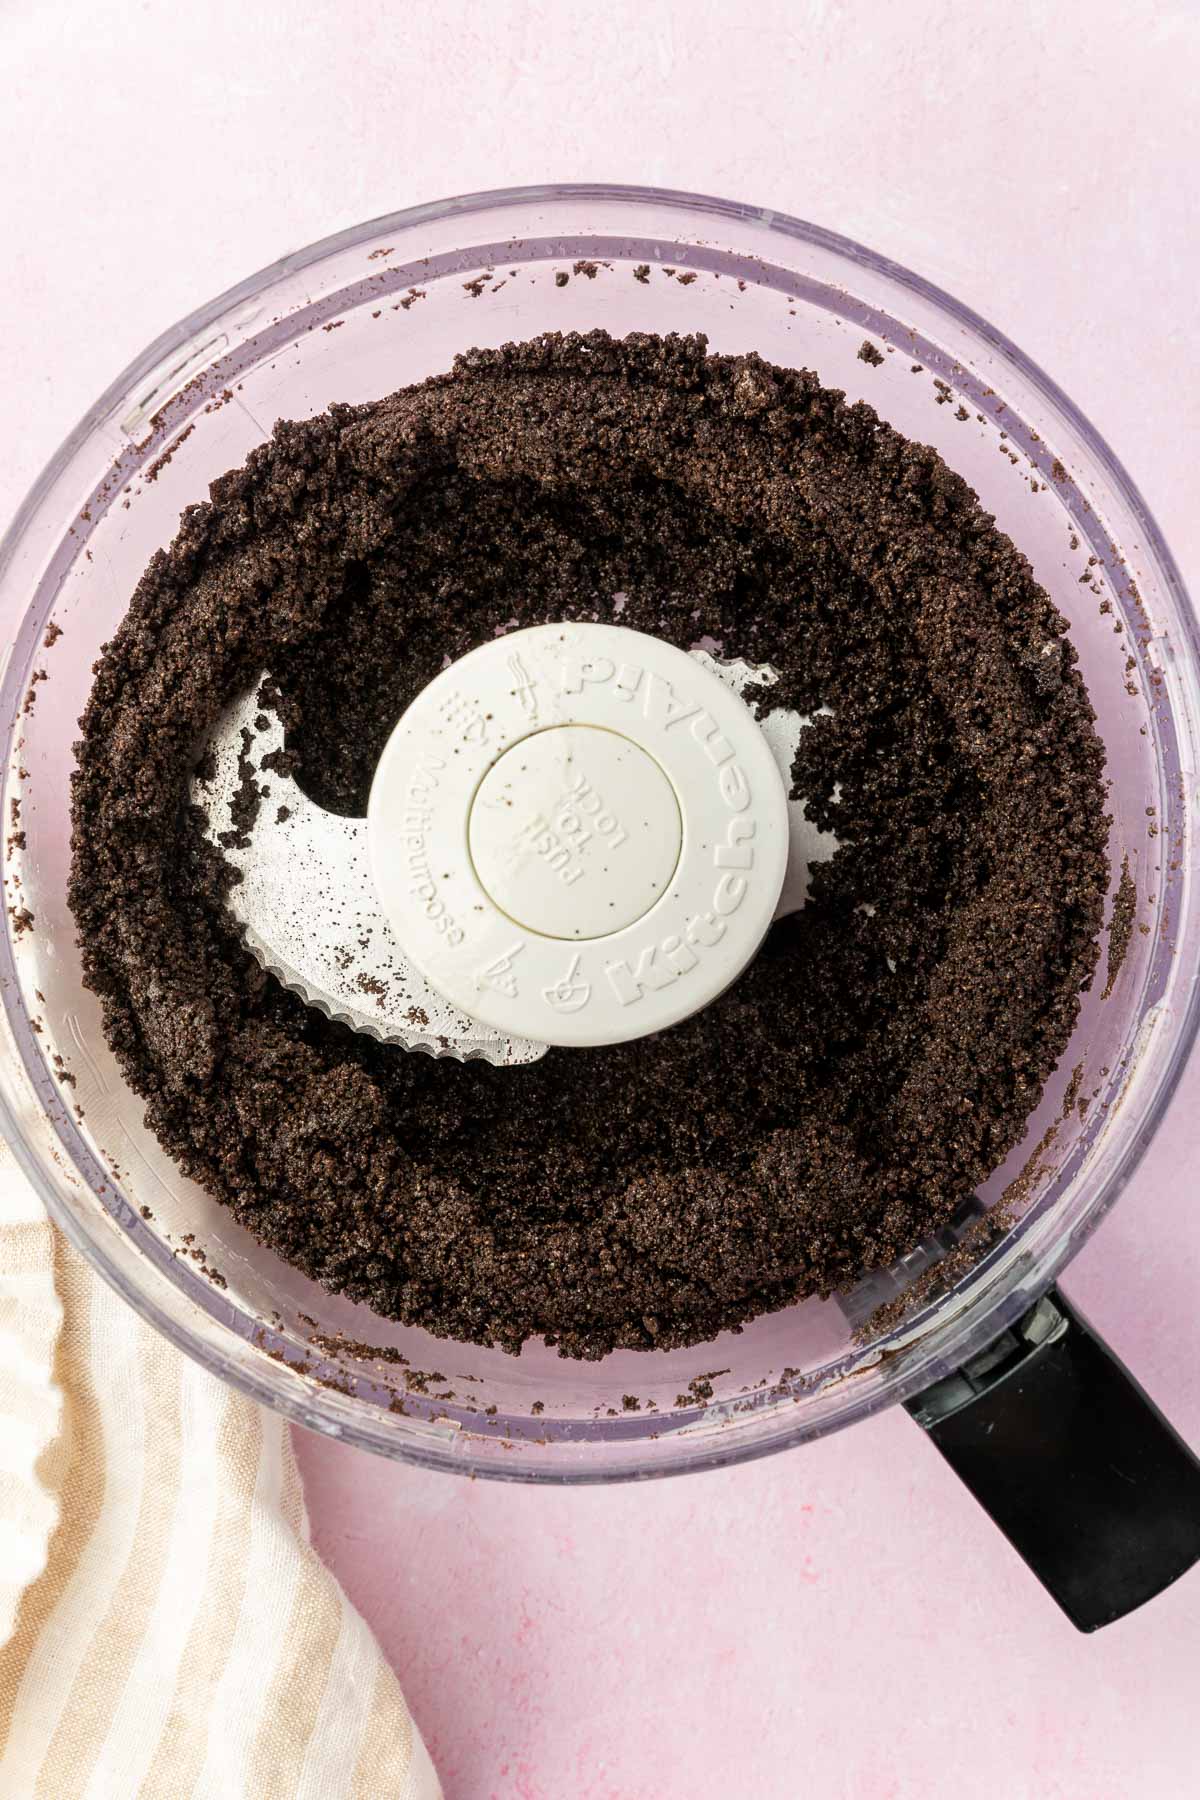 A food processor with gluten-free Oreo crumbs and melted butter mixed together to make an Oreo pie crust.